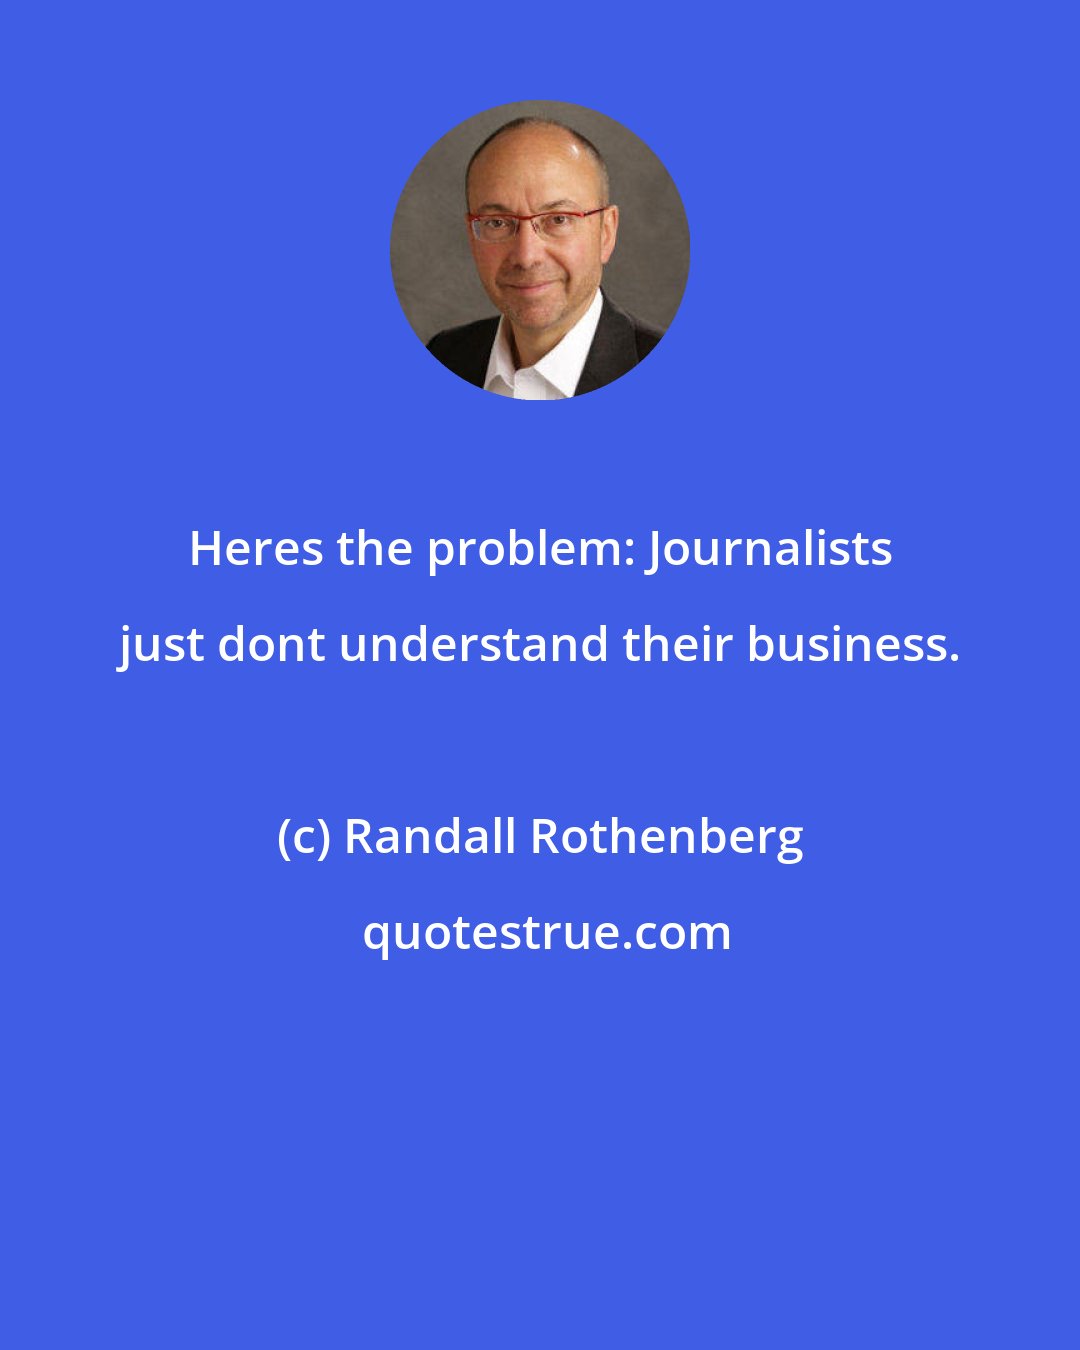 Randall Rothenberg: Heres the problem: Journalists just dont understand their business.